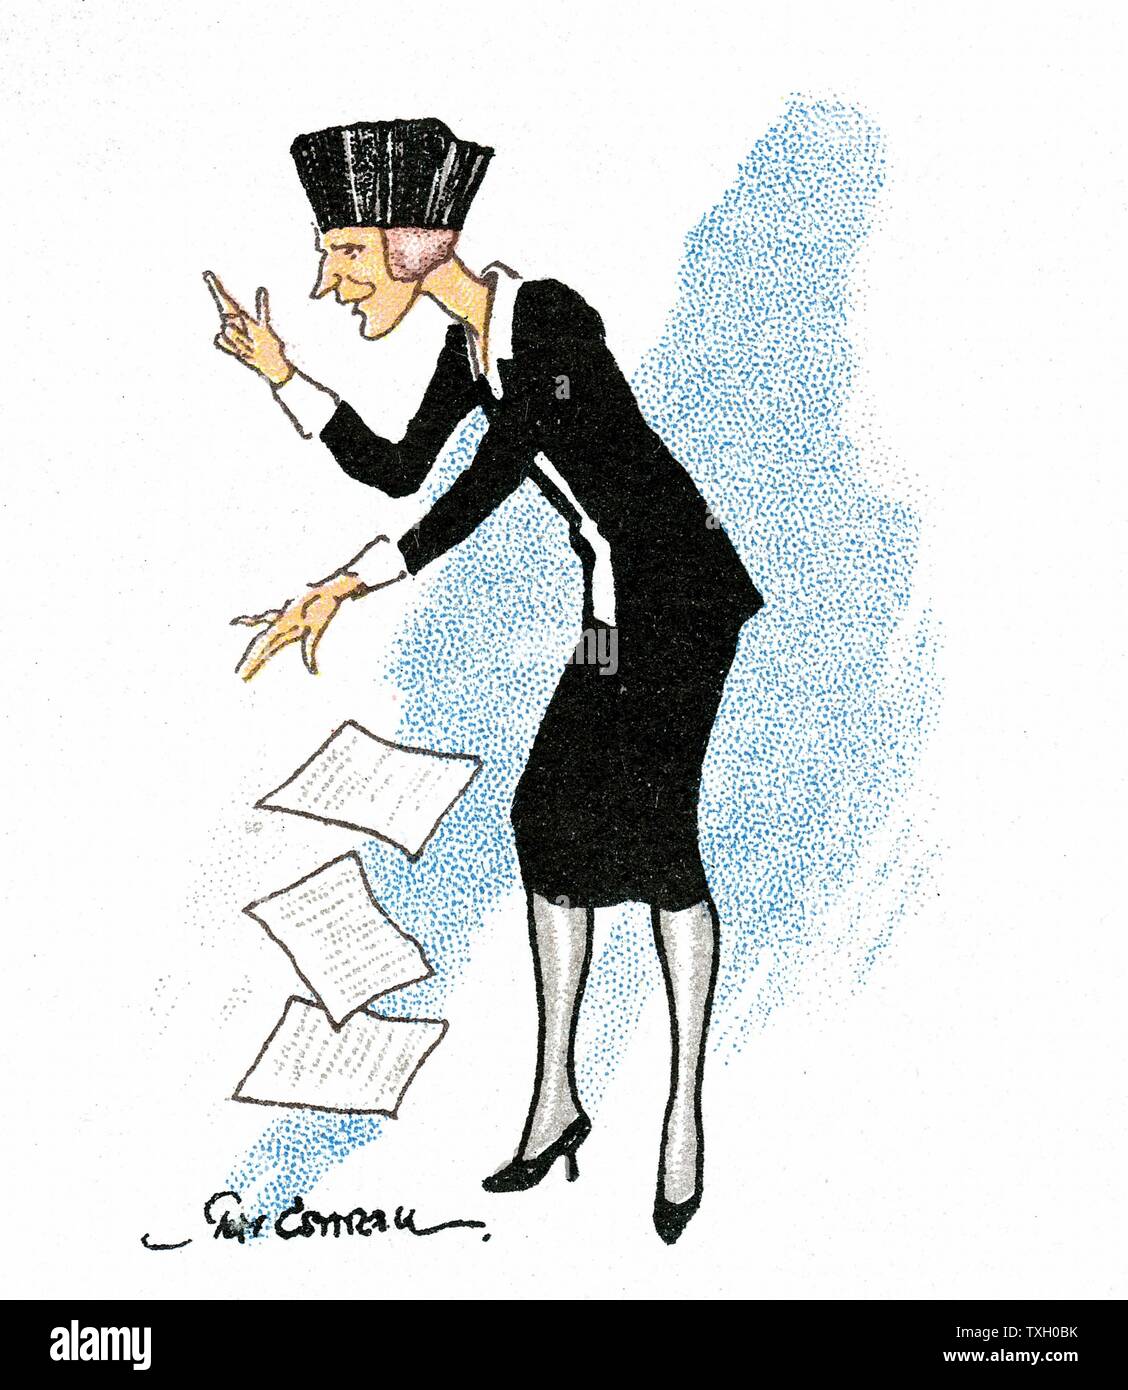 Nancy Witcher Langhorne Astor, Viscountess Astor (1879-1964) making a speech in Parliament. American-born British politician. Conservative Member of Parliament for Plymouth 1919. First woman to take her seat in House of Commons. Cartoon. Card published London 1929 Stock Photo